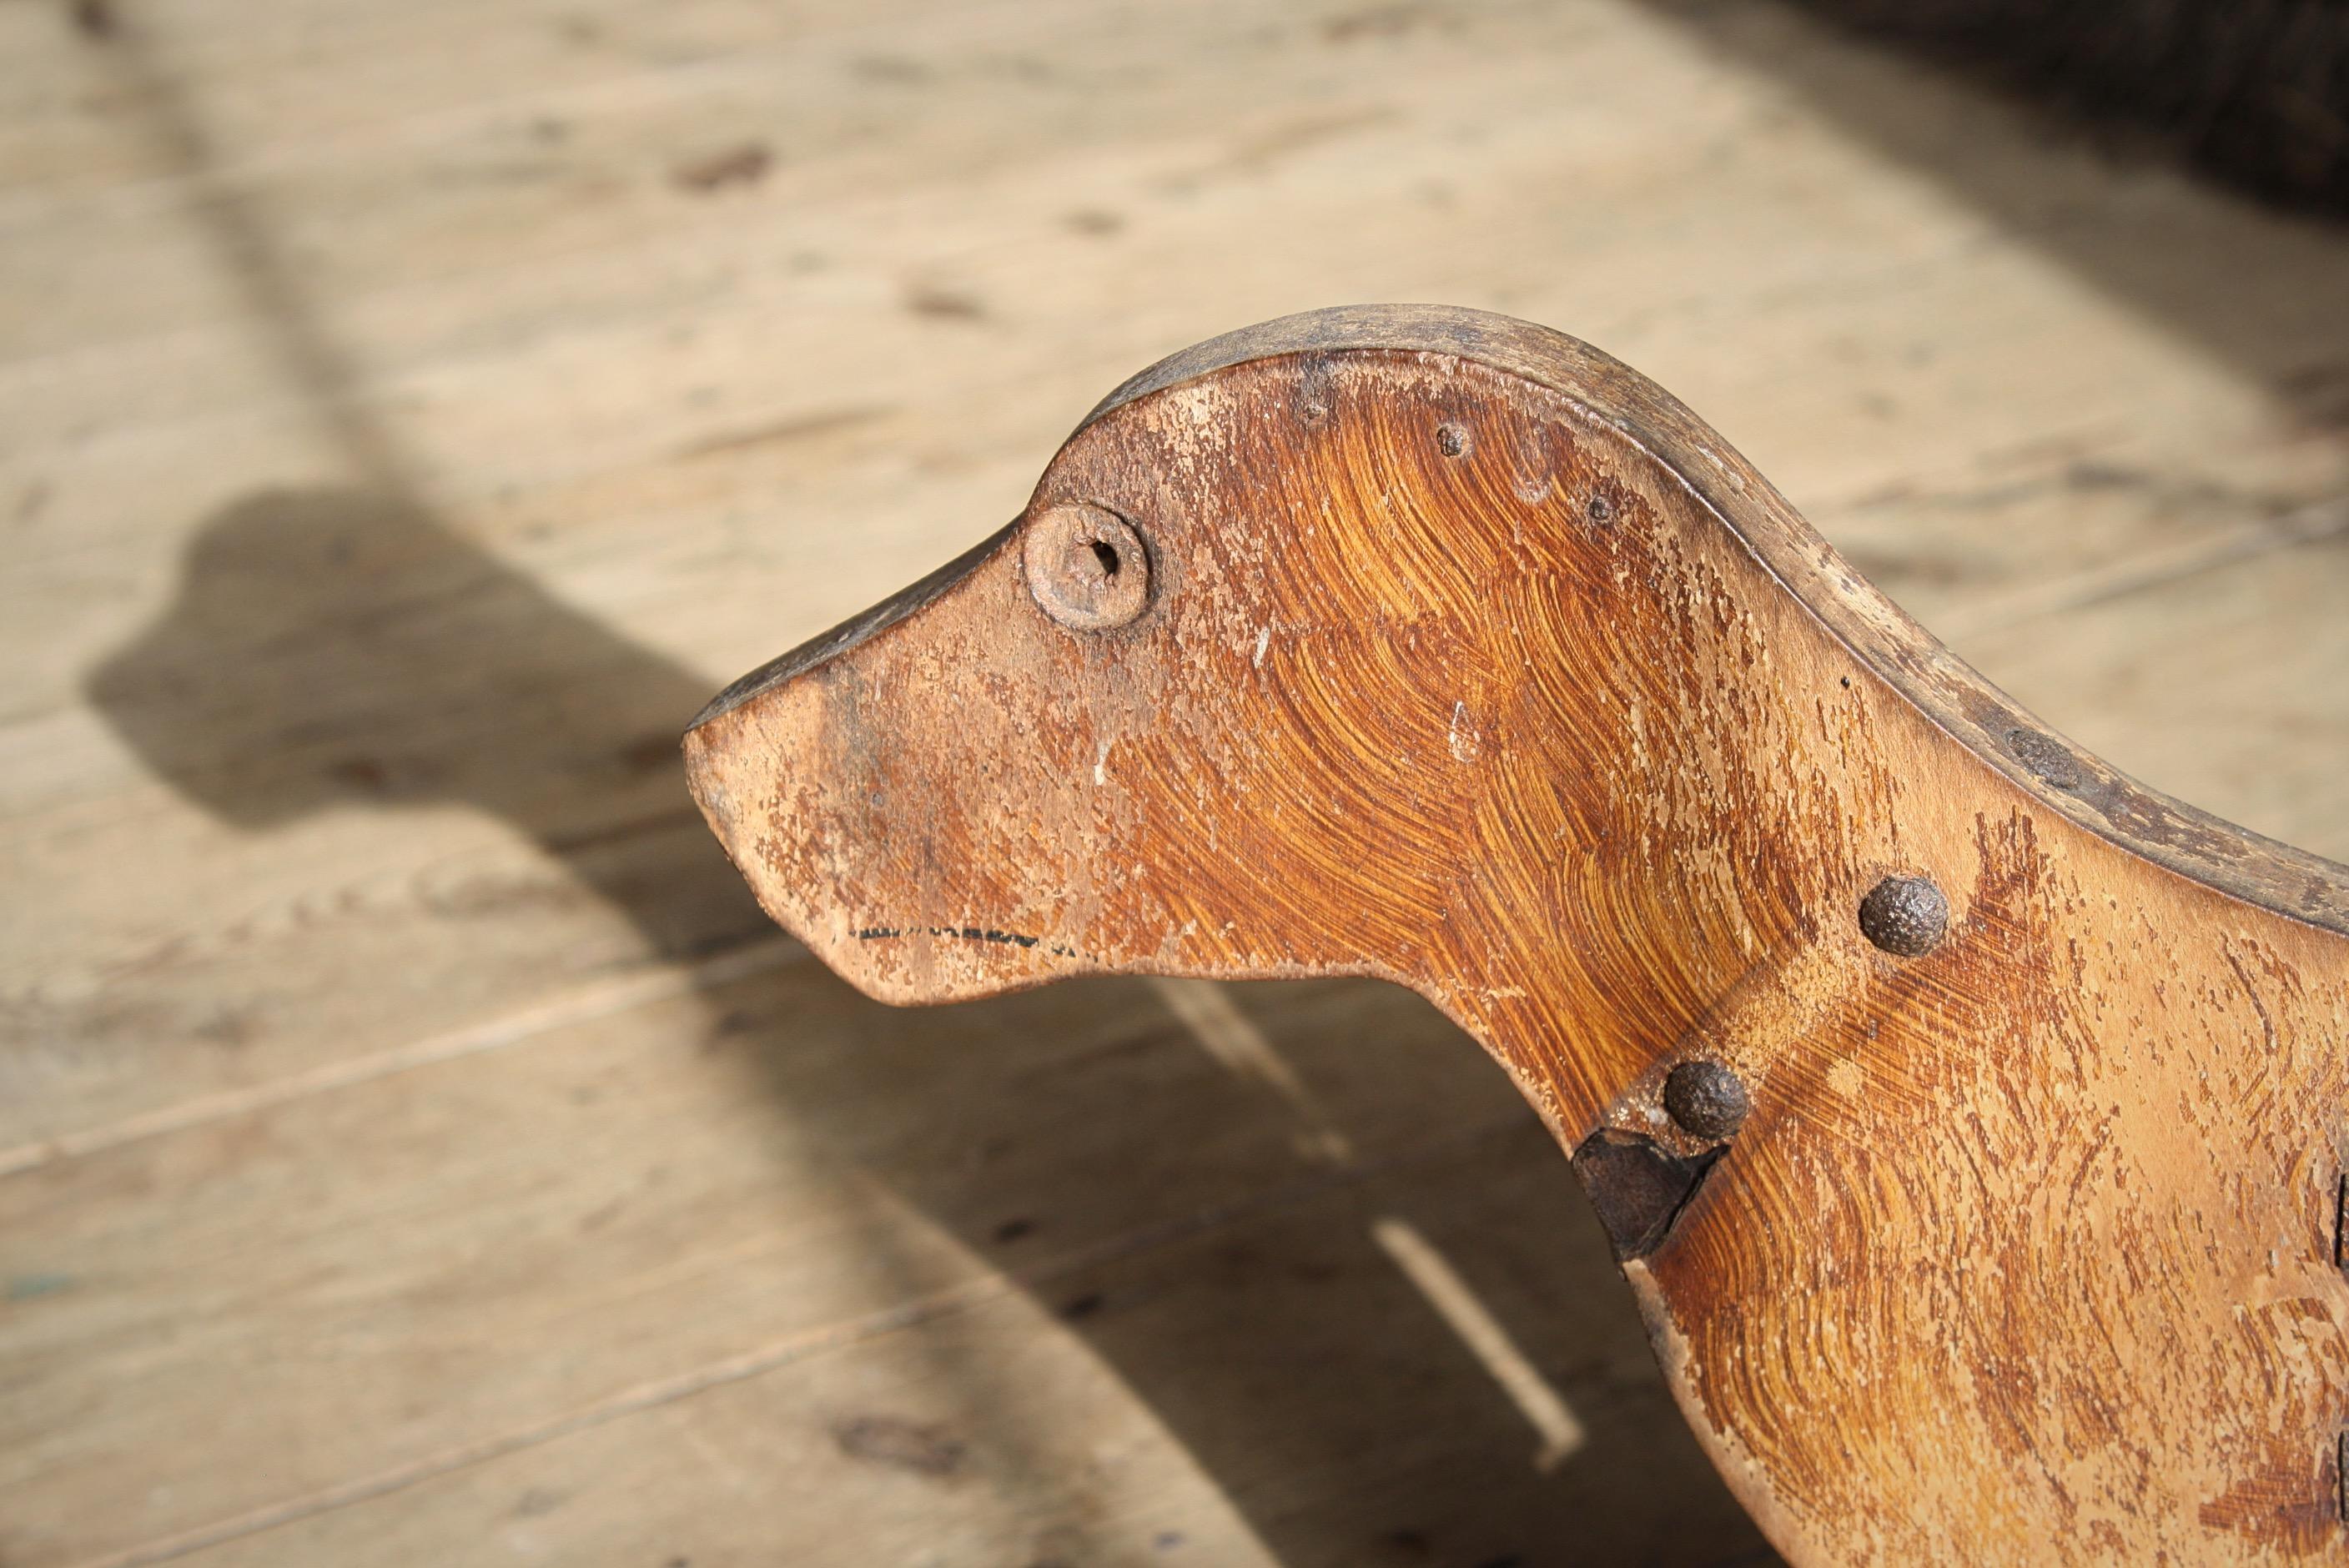 Iron Late 18th / Early 19th Georgian Articulated Toy Pull Along Dog Folk Art